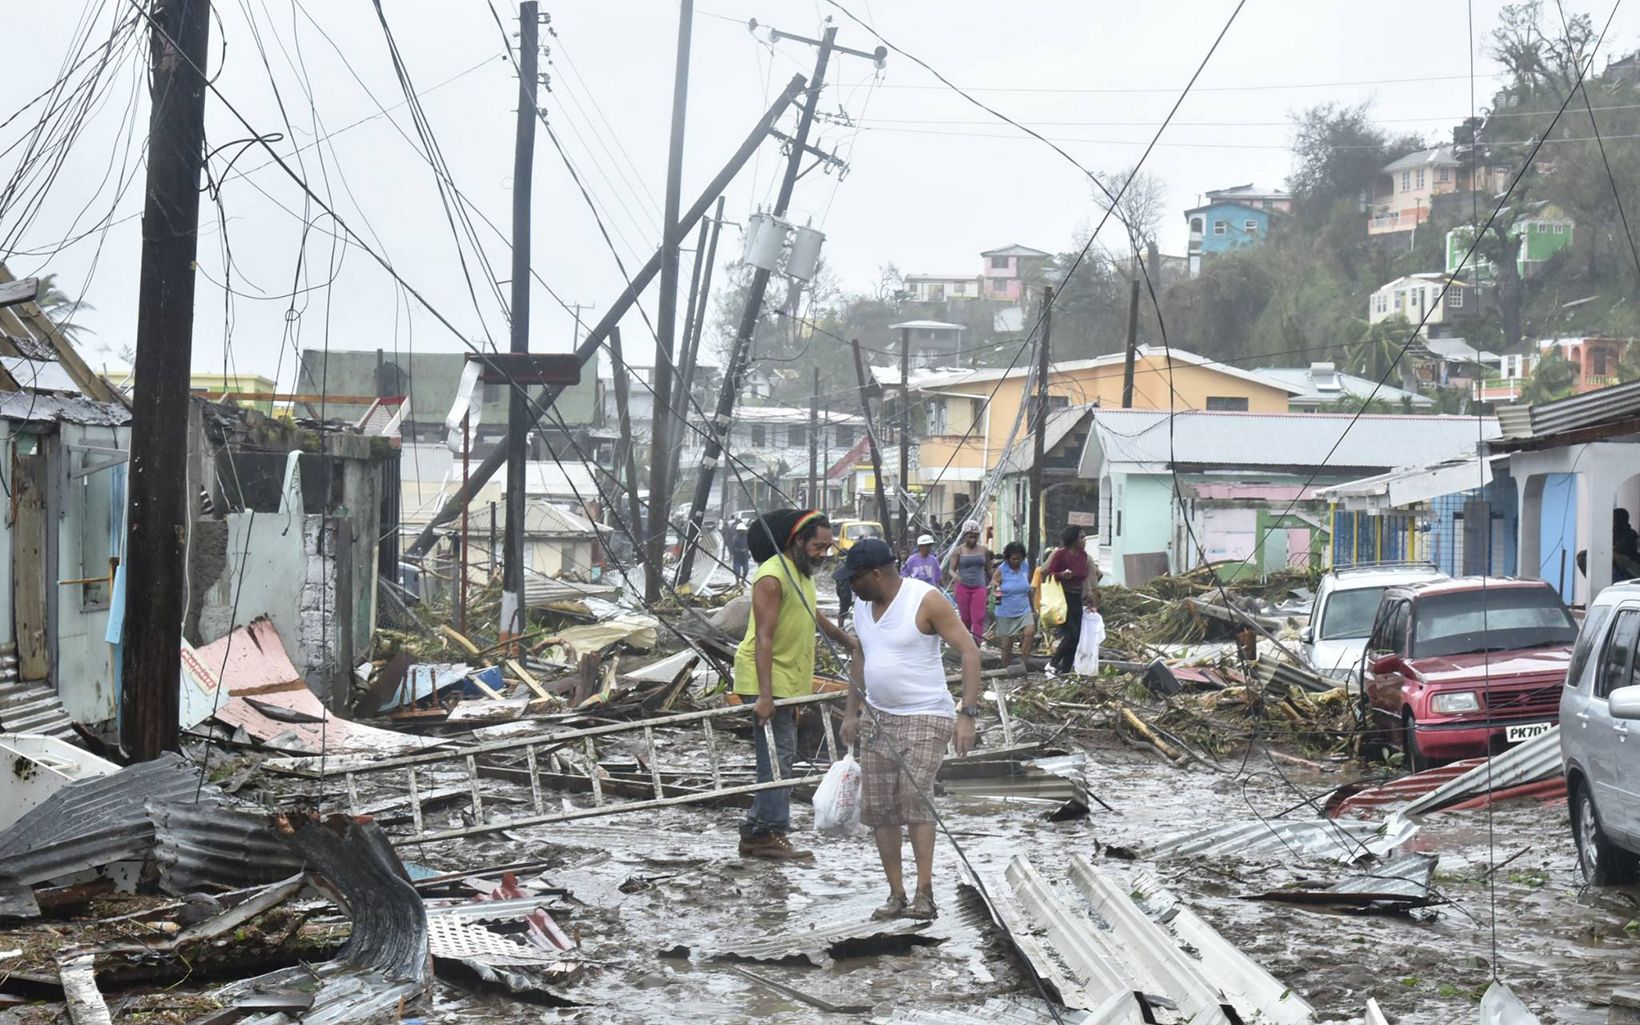 Residents of Dominica clear debris after Hurricane Maria